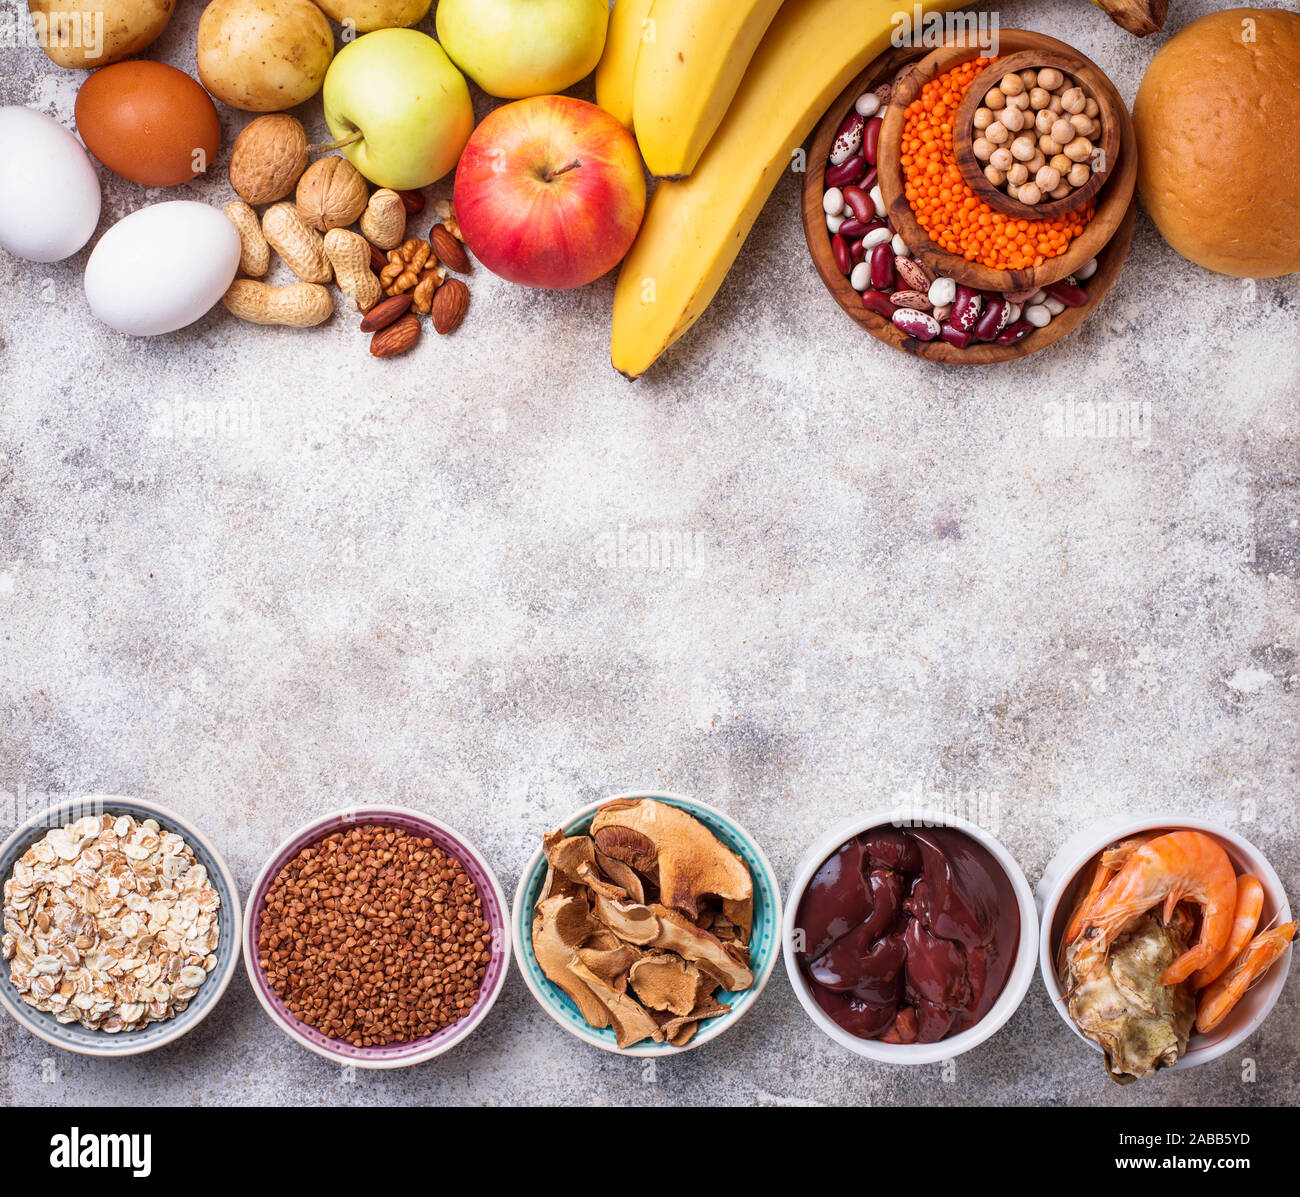 Healthy product sources of iron Stock Photo